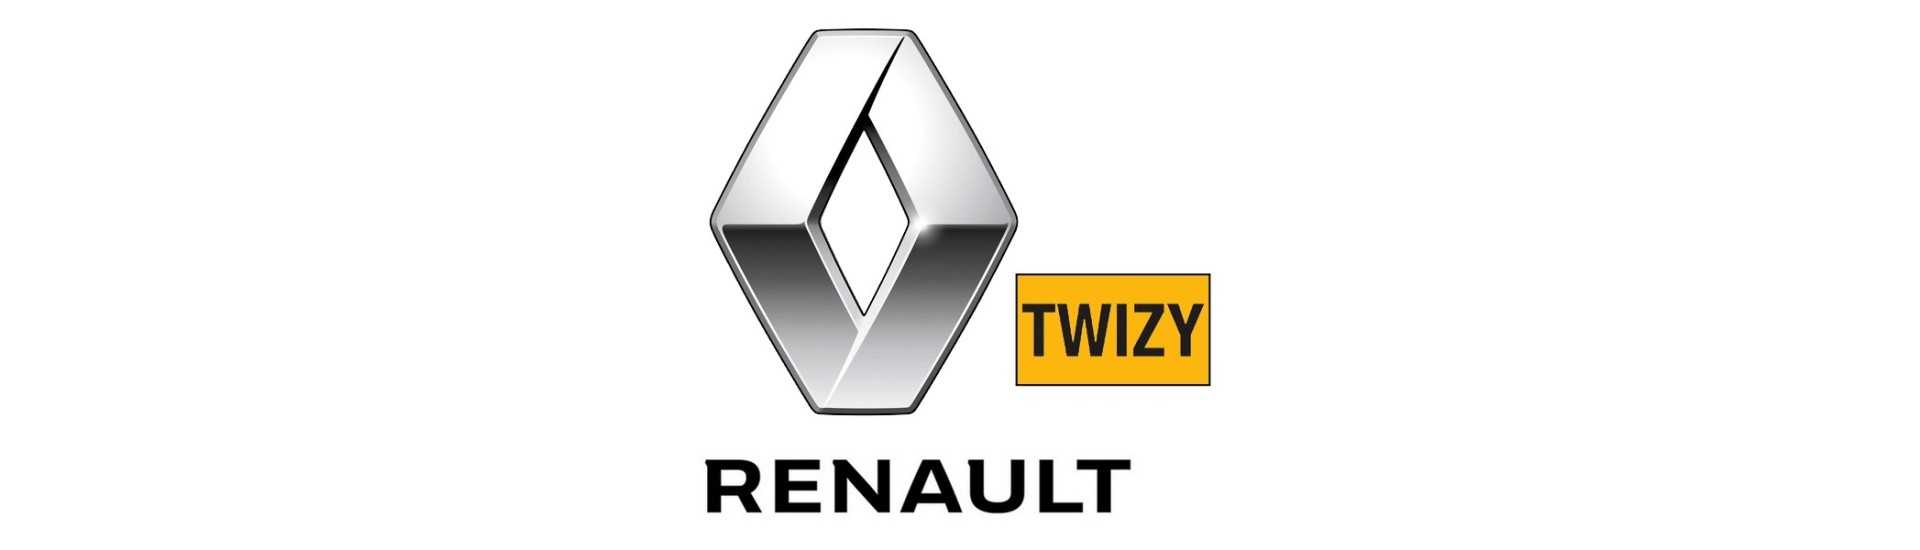 Rotating sensor at the best price without a permit Renault Twizy